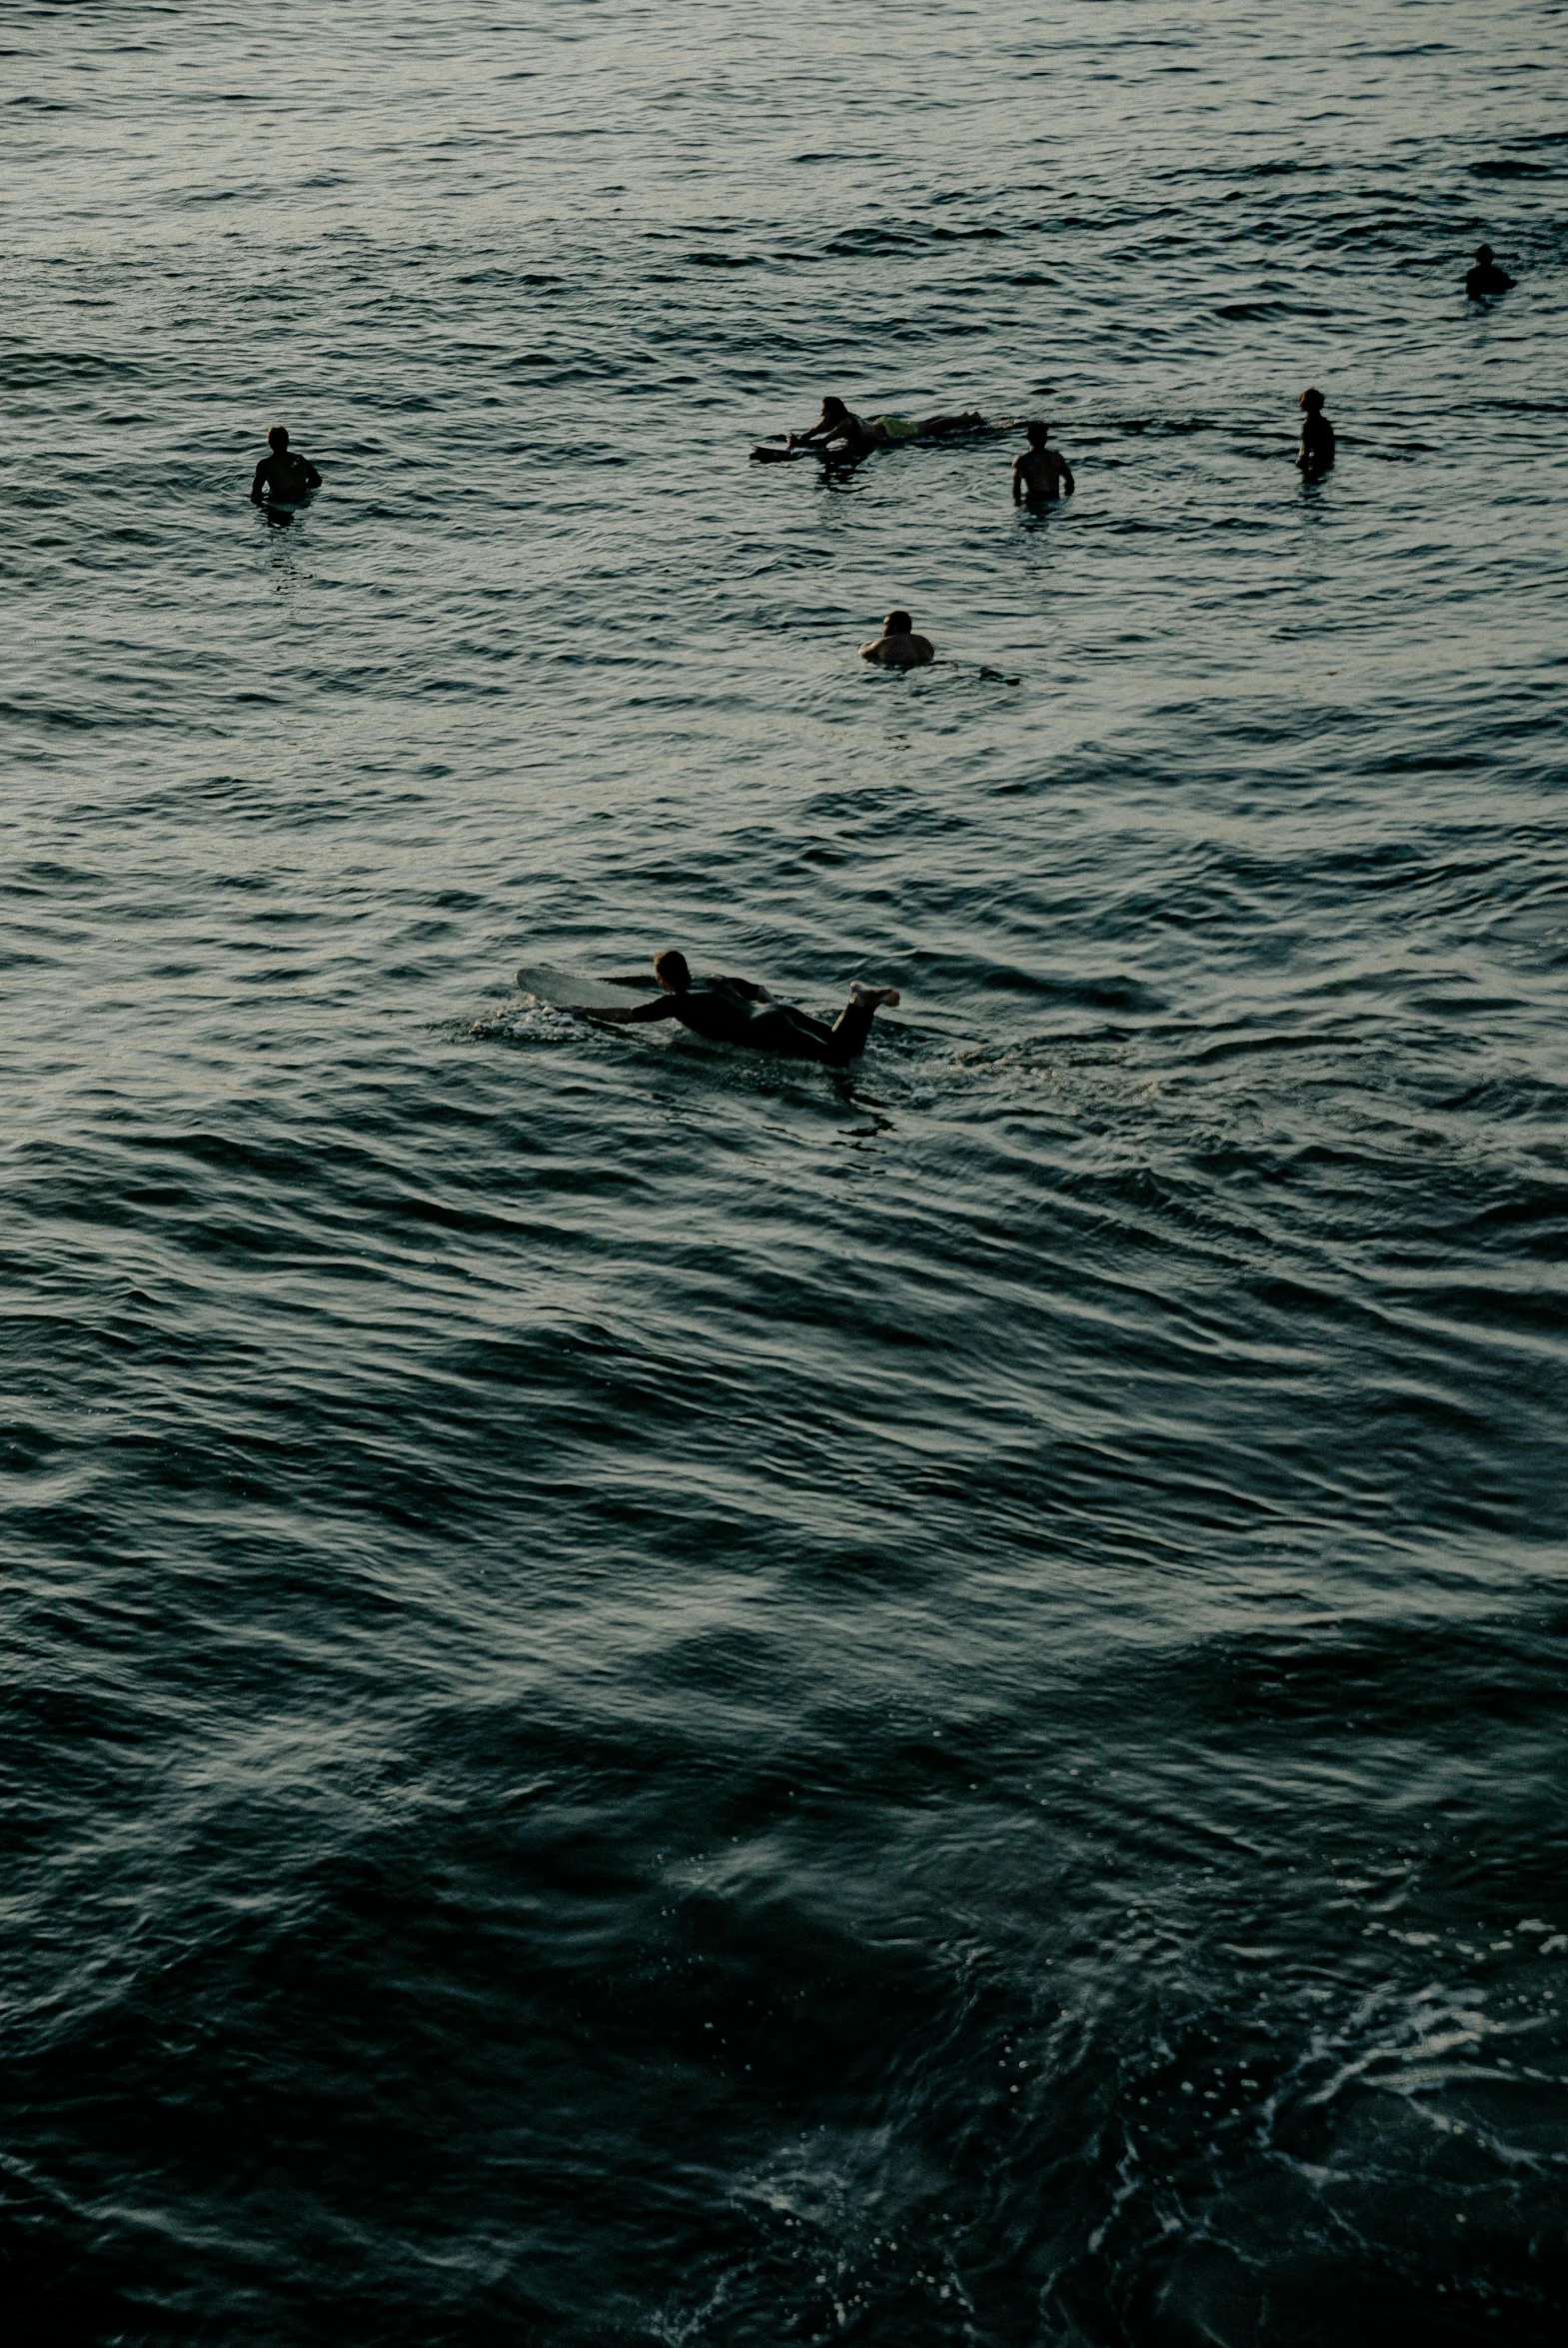 a group of people swimming in the ocean, by Elsa Bleda, low quality photo, late summer evening, surfing, flattened